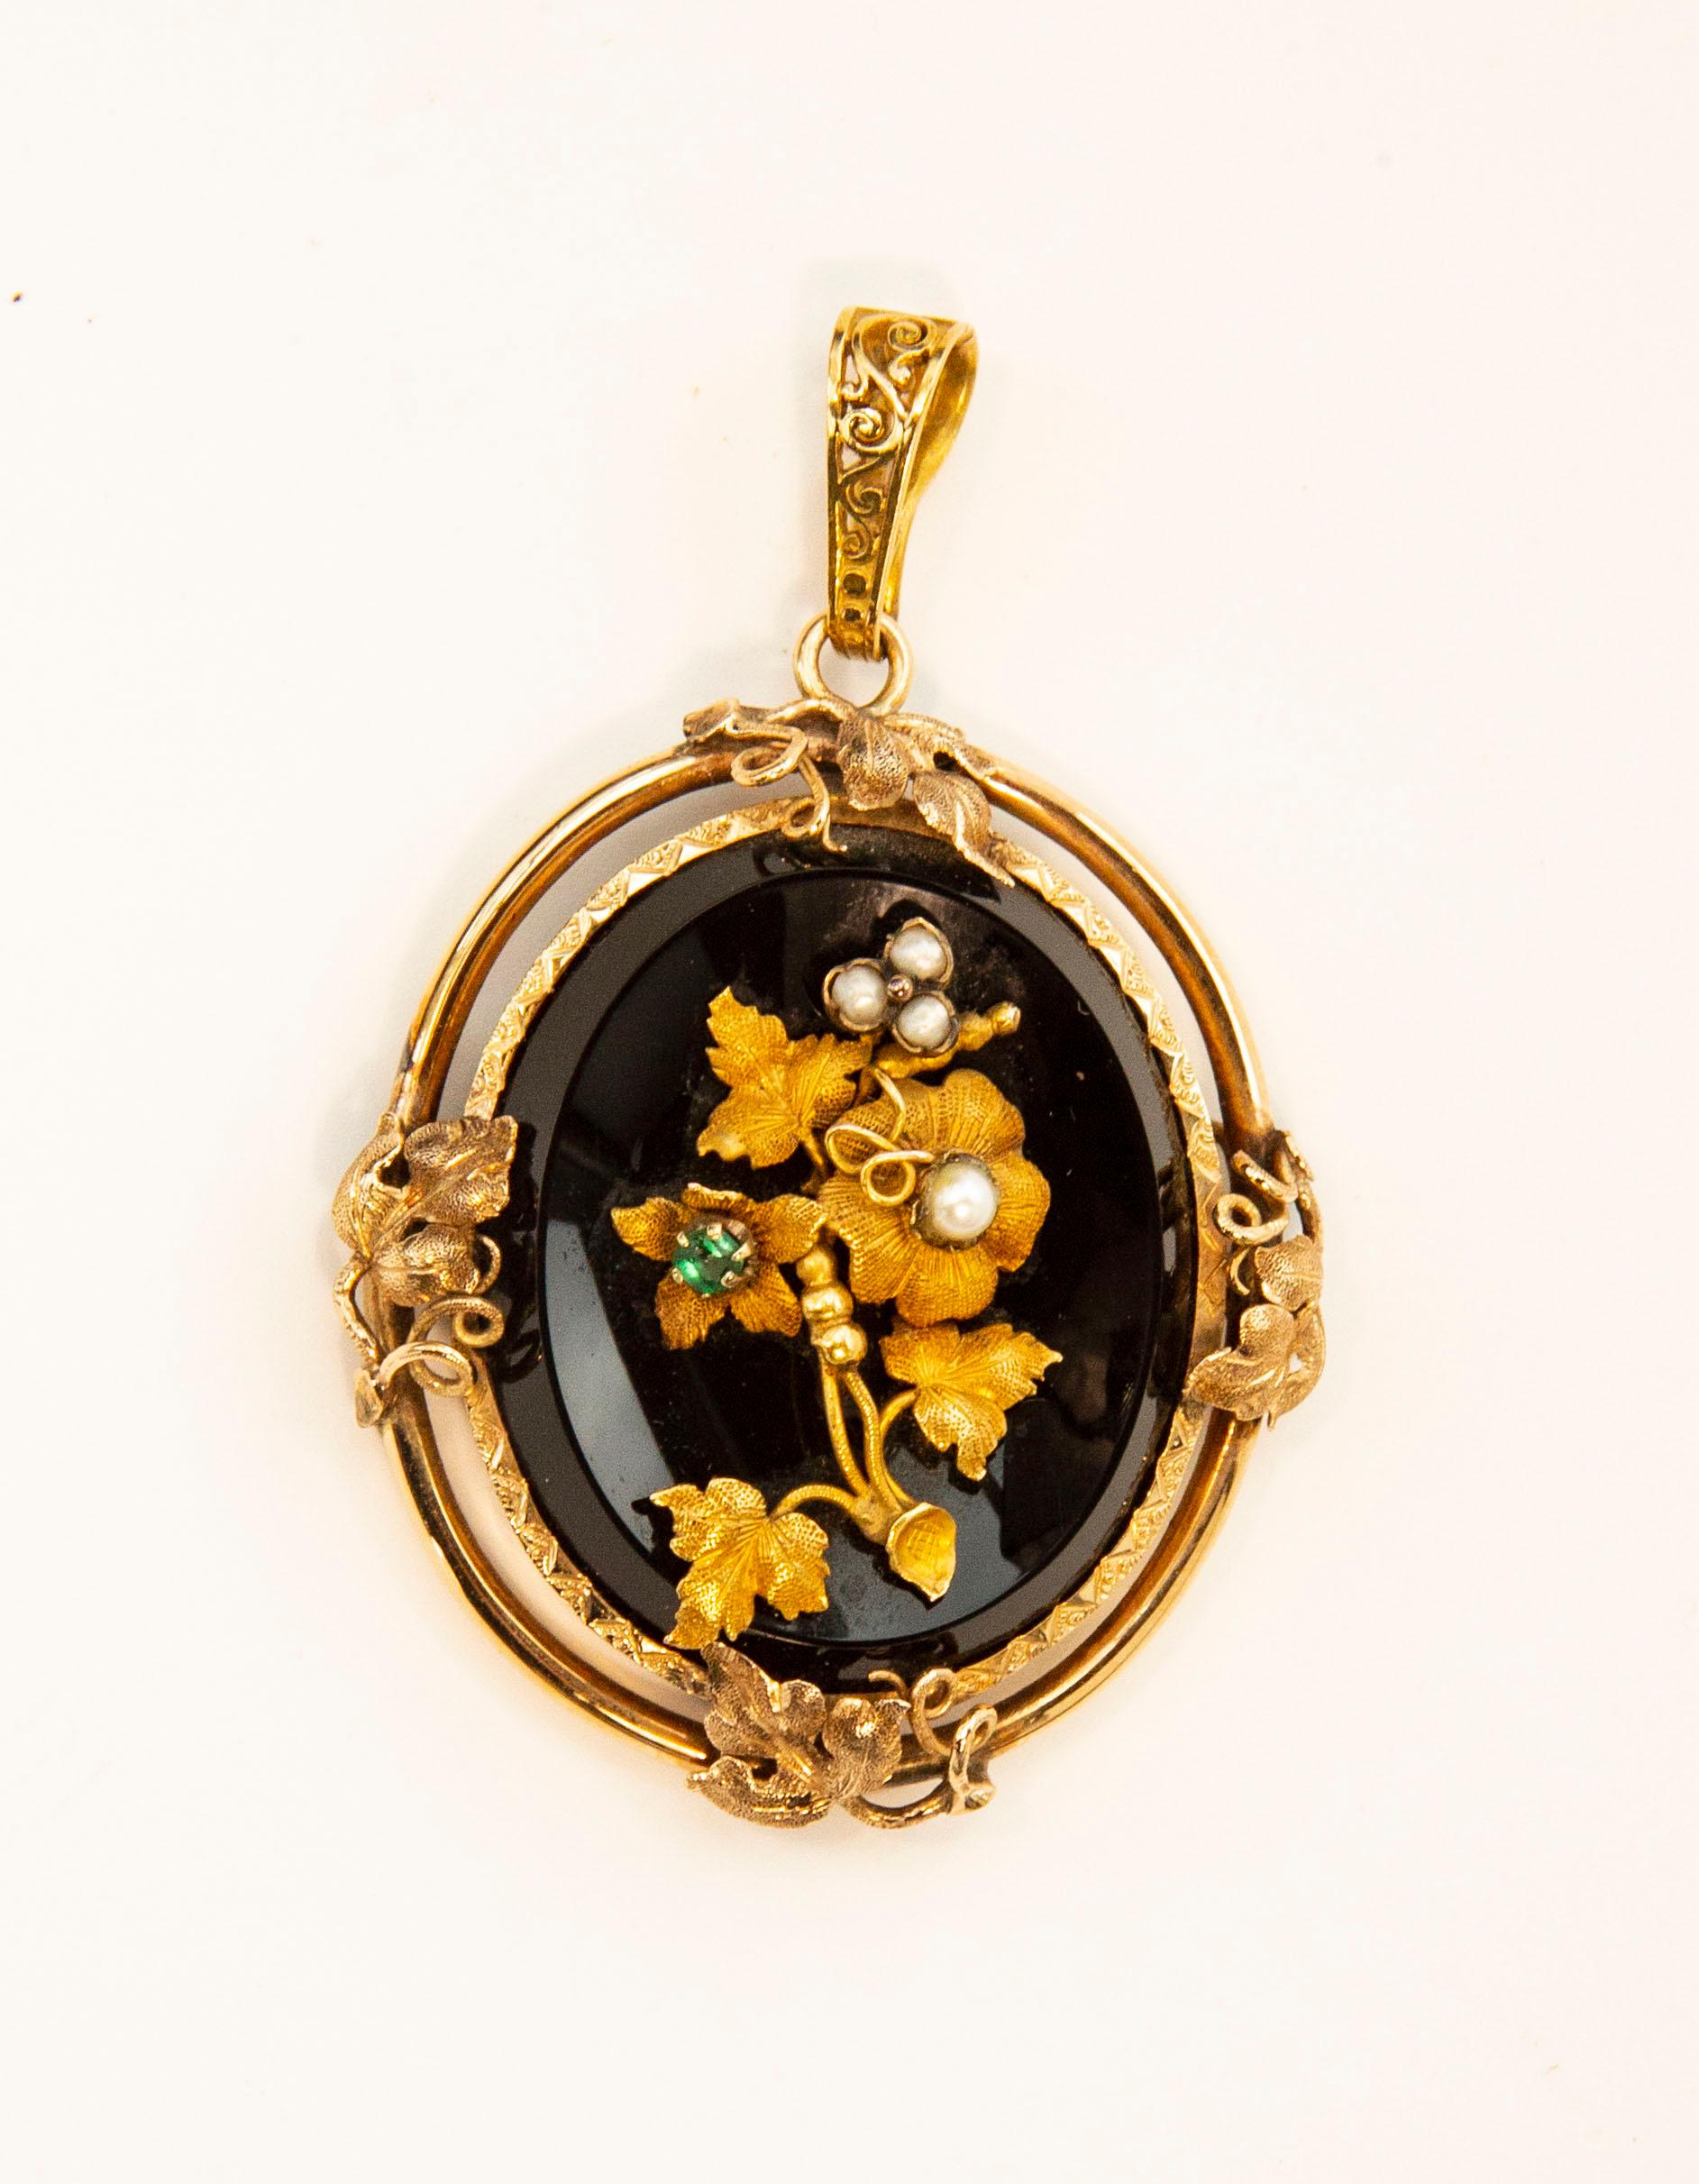 A Victorian antique 14 karat oval onyx pendant with a floral decoration assembled of pearls, emerald, and engraved gold leaves with petals. The pendant is dating back to the early 20th century, and it belonged to the mourning jewelry. In the past,